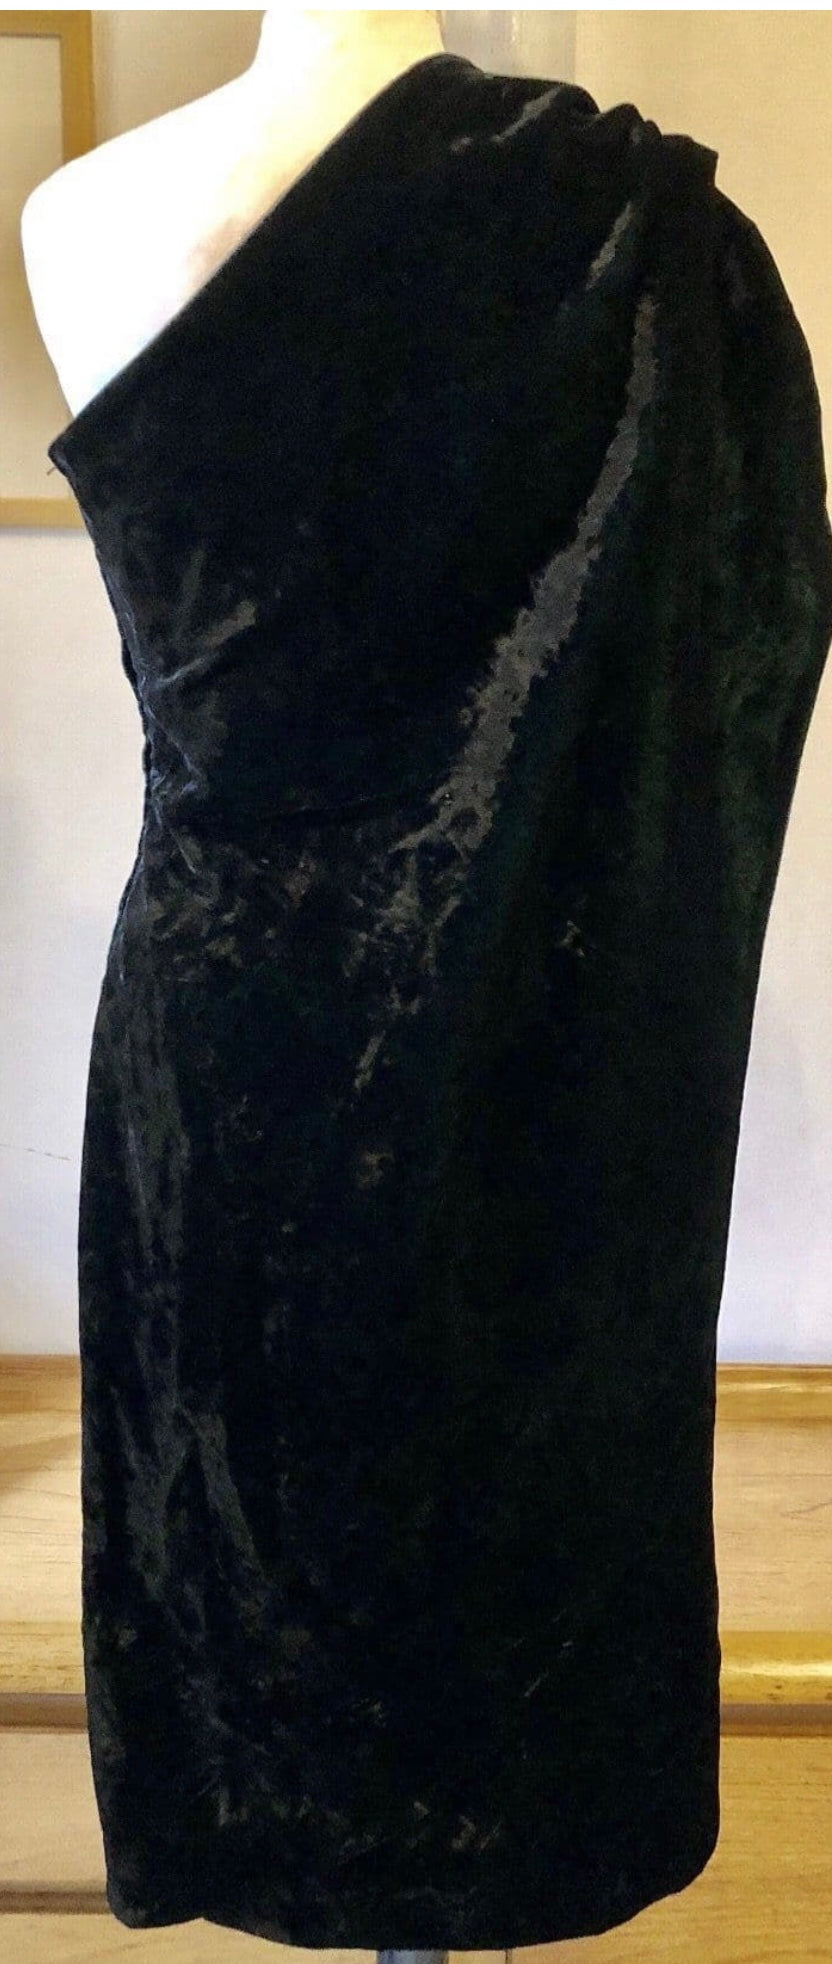 Dottie - vintage 1950s black velvet and green satin wiggle dress with draped shoulder XS to 2XL